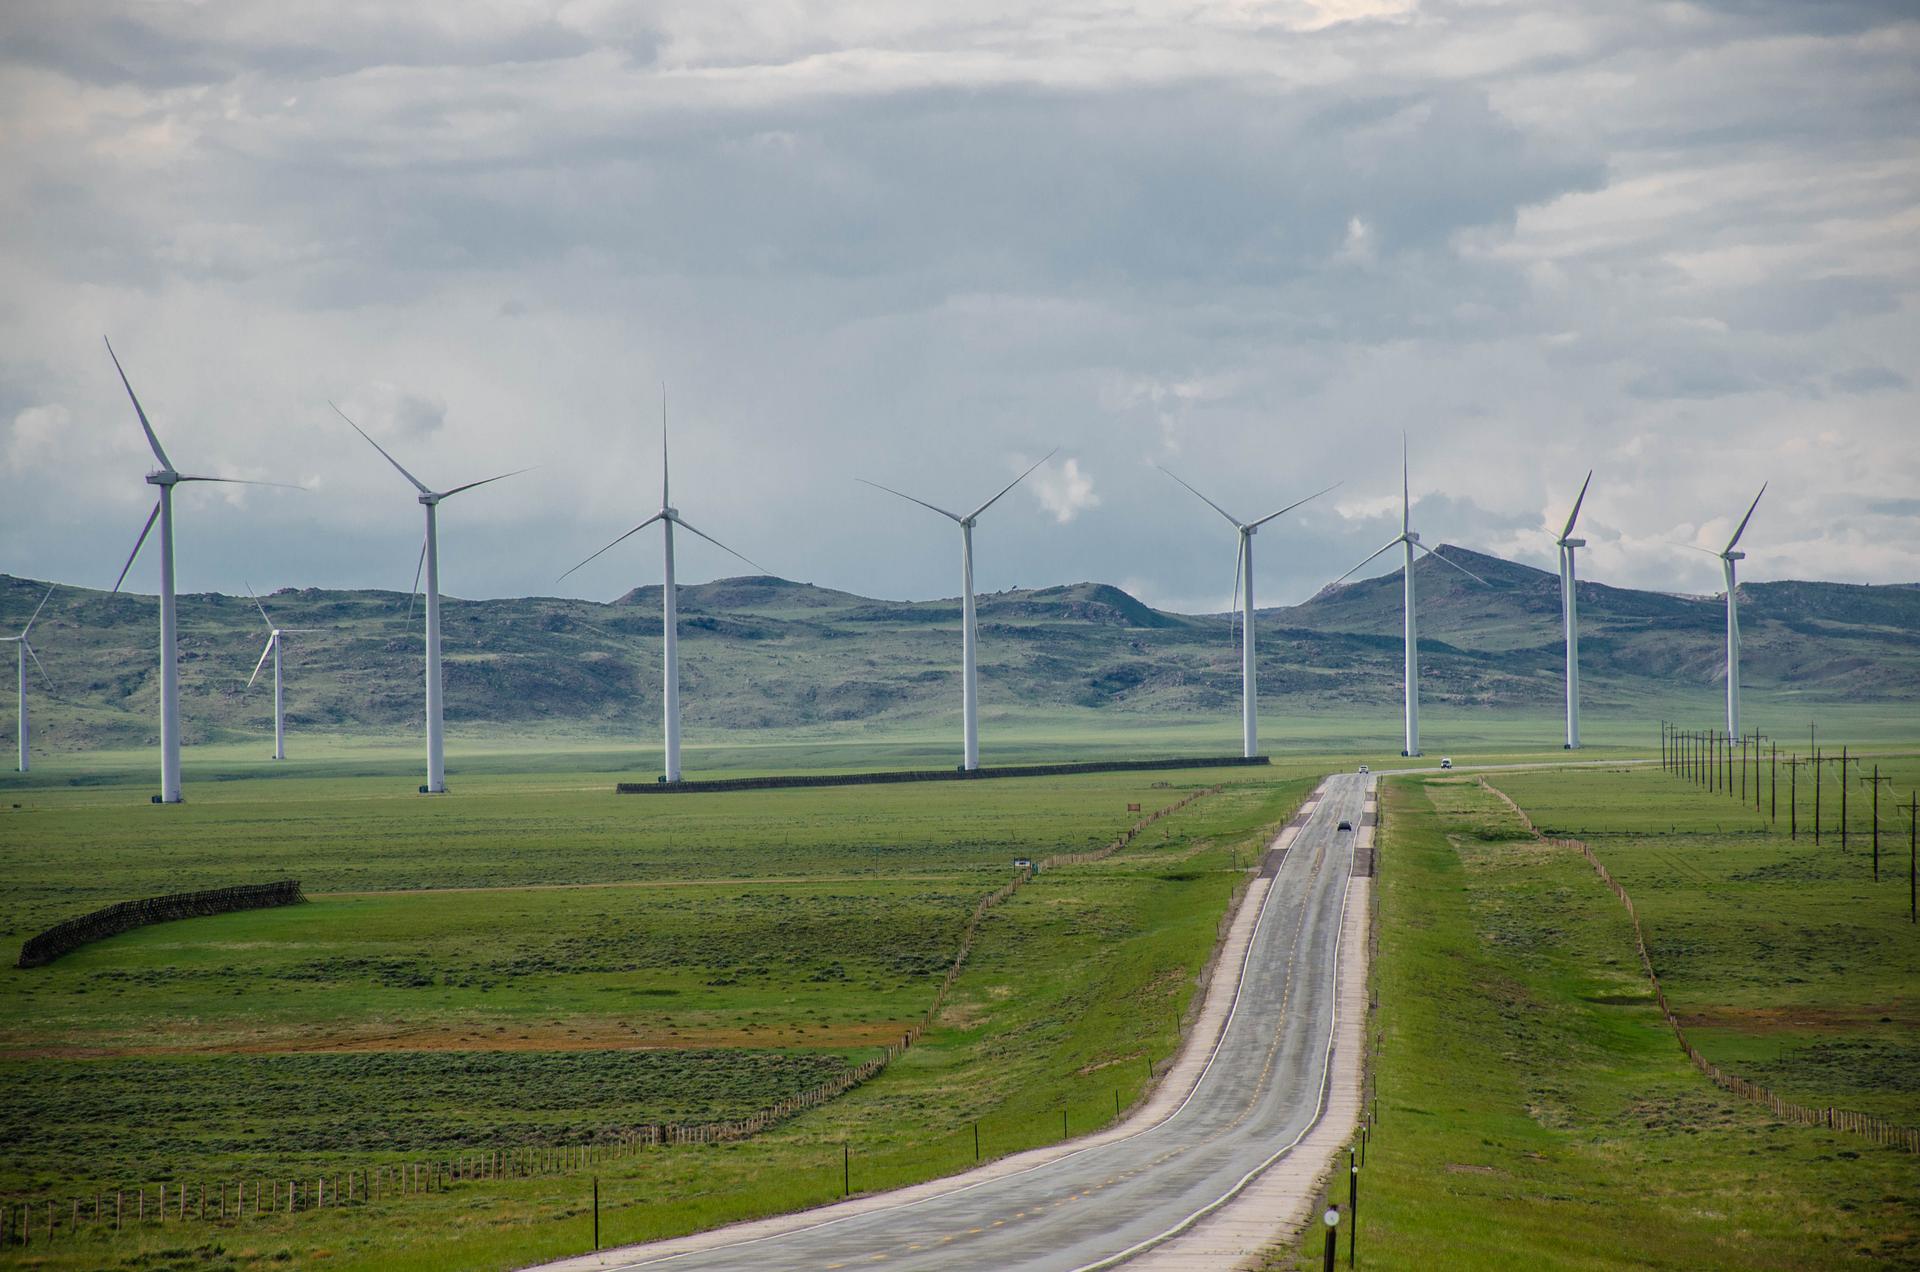 South-central Wyoming has some of the strongest winds in the United States. The Department of Energy estimates that by 2030, Wyoming has the potential to power the equivalent of 3.4 million homes.